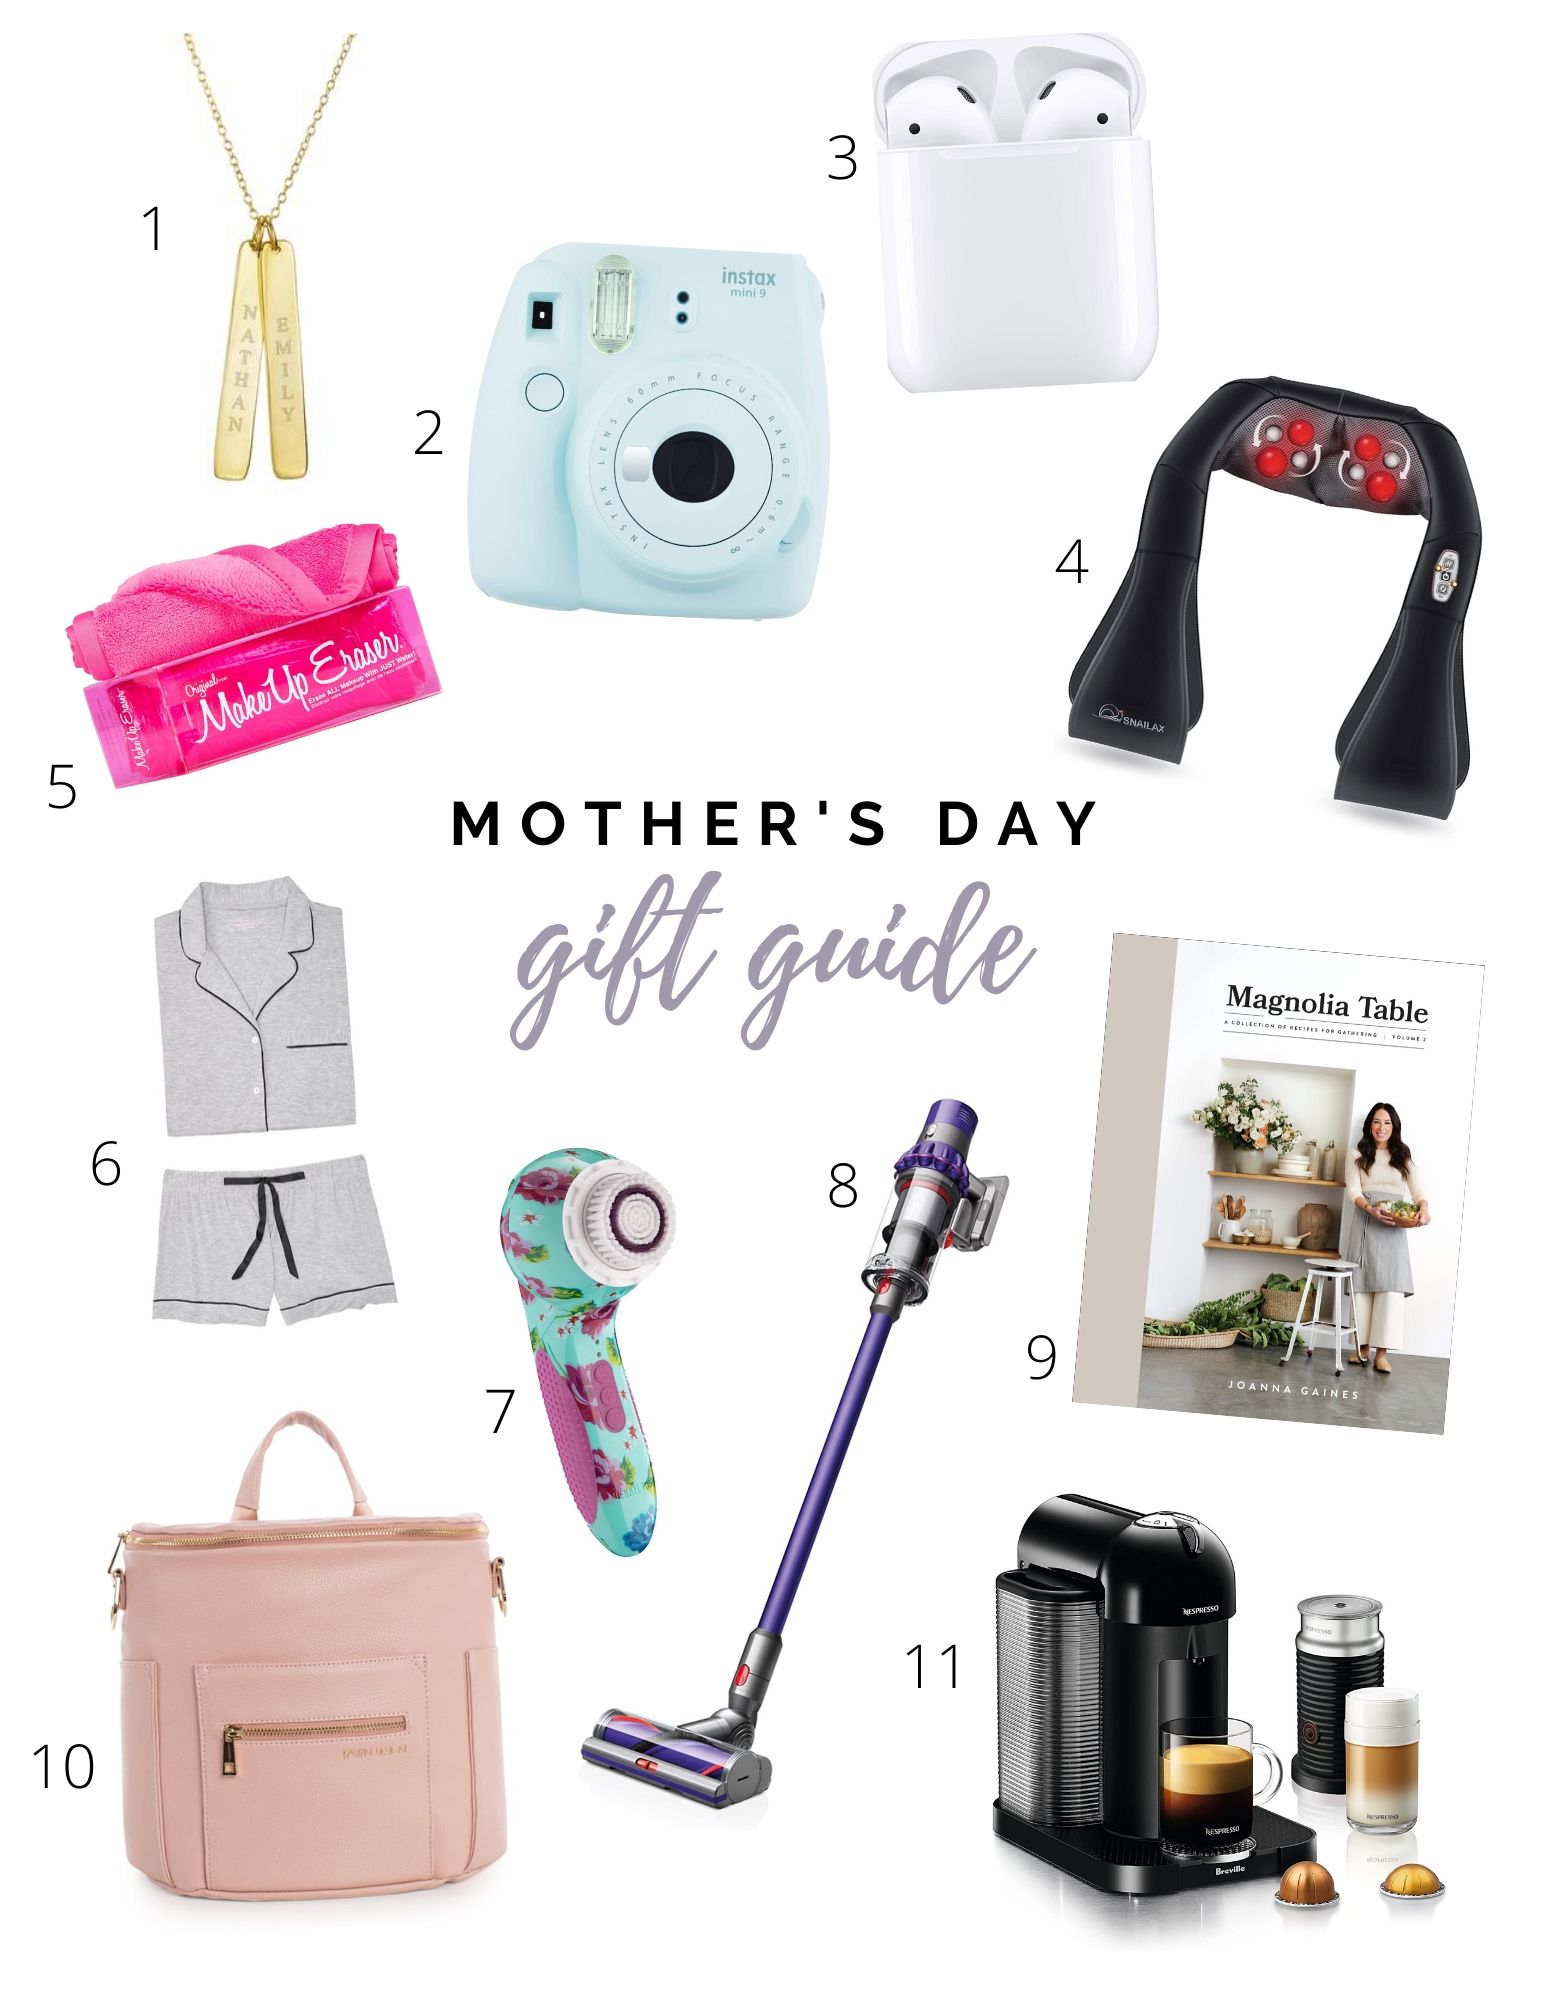 gift ideas for mother's day 2020